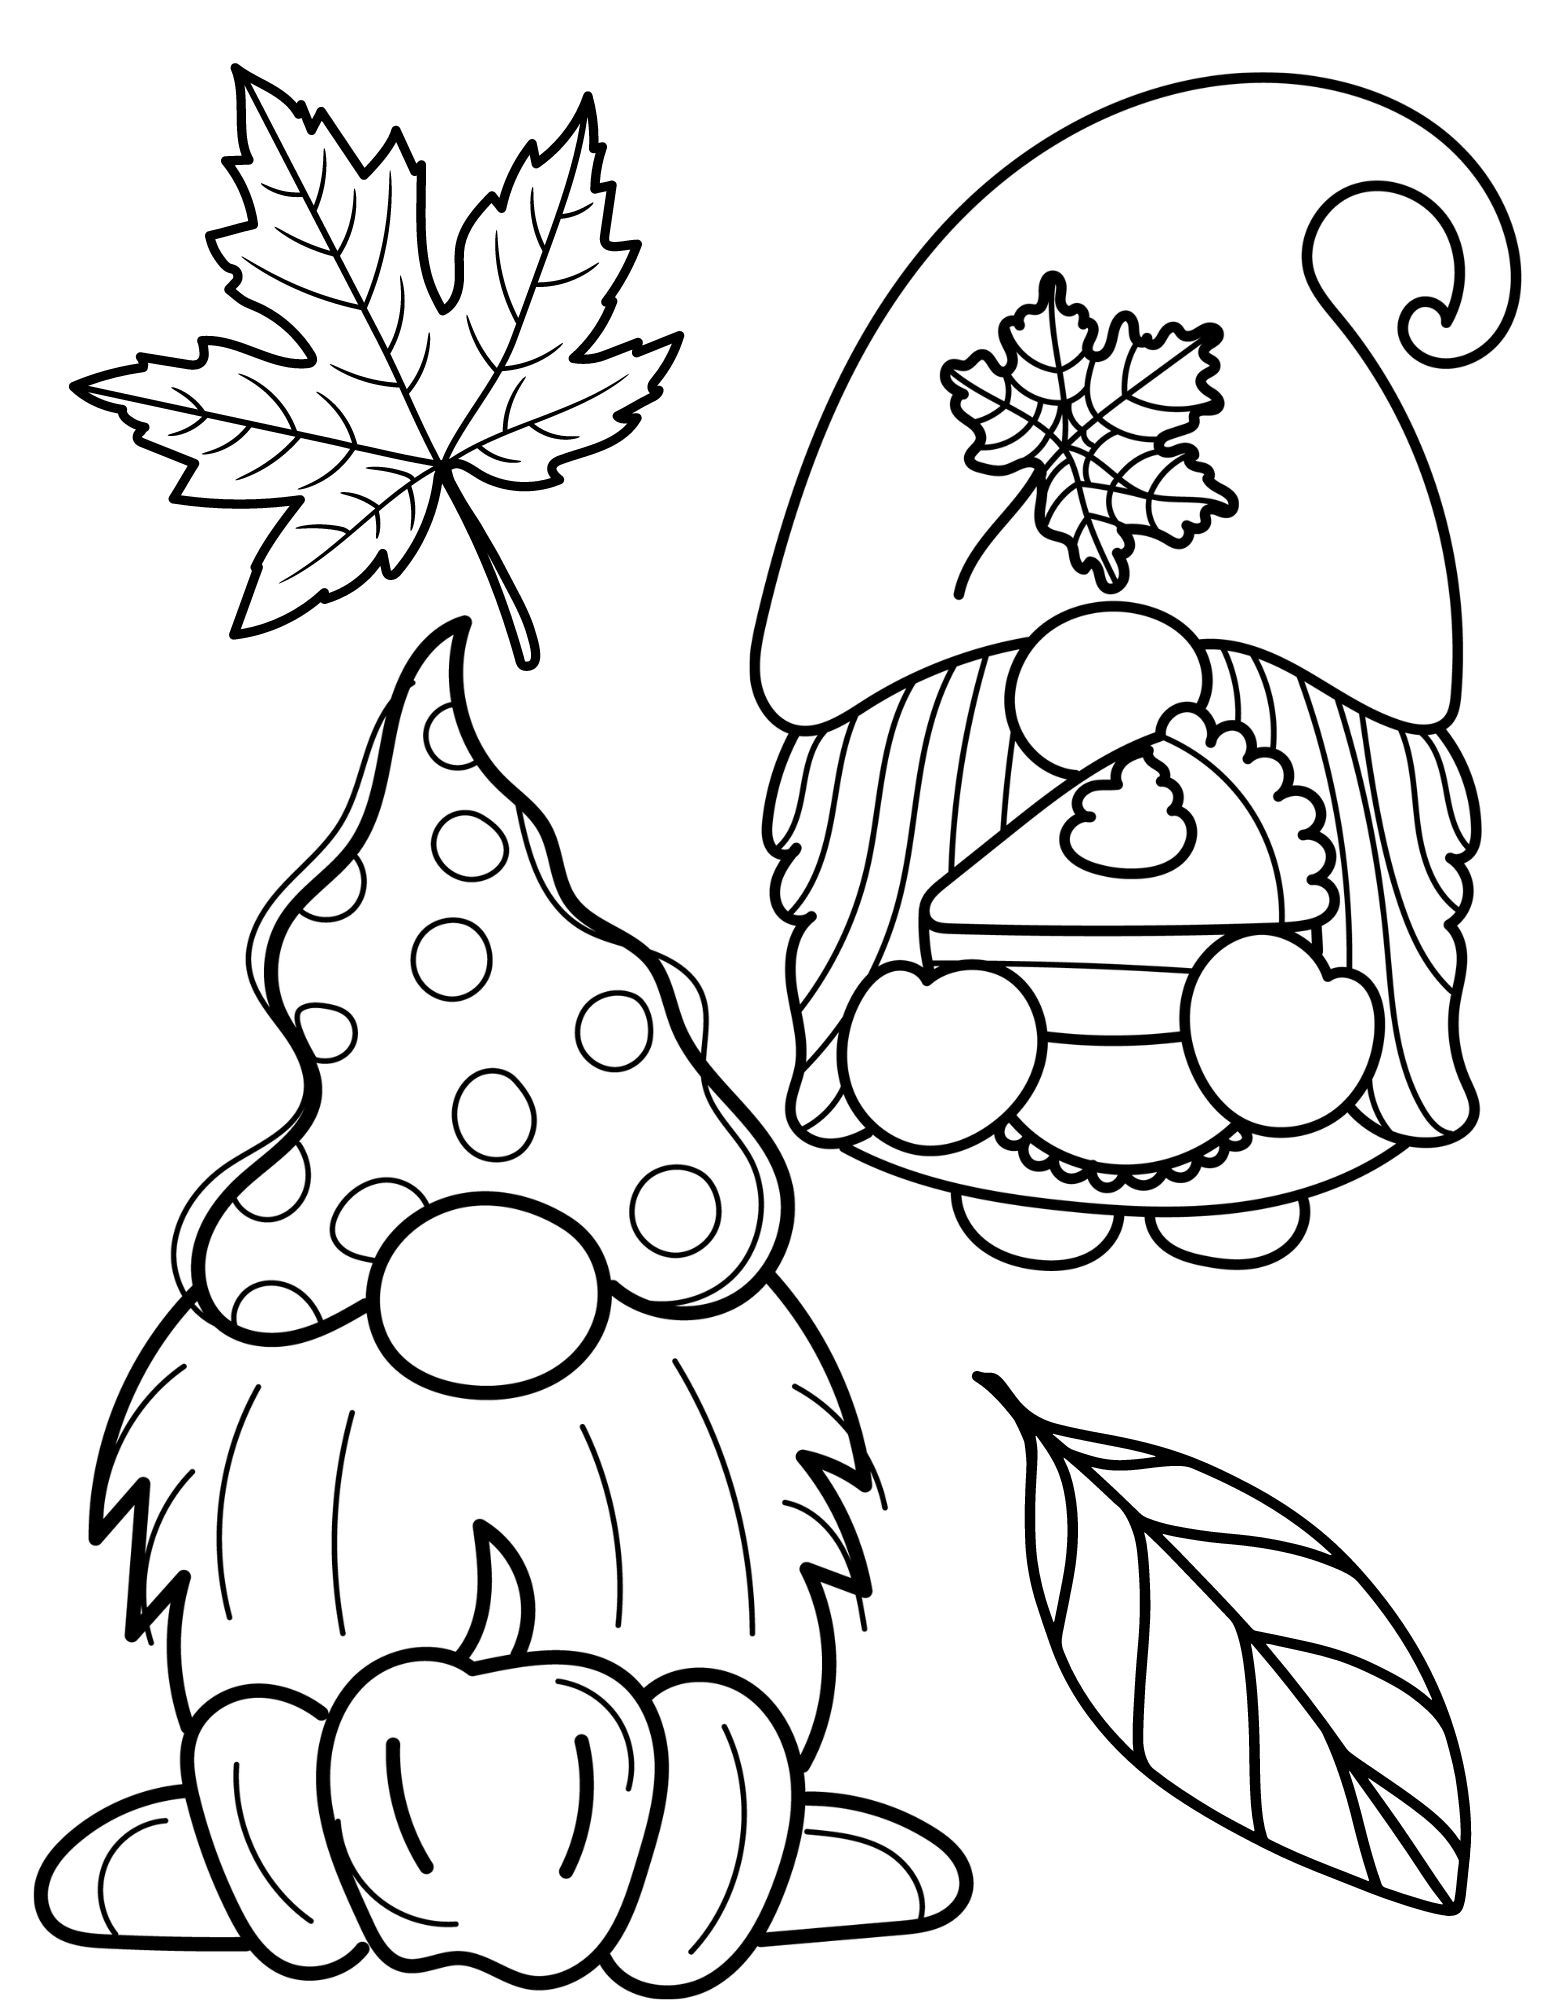 Celebrate Freedom with 4th of July: 180+ Free Coloring Pages 46